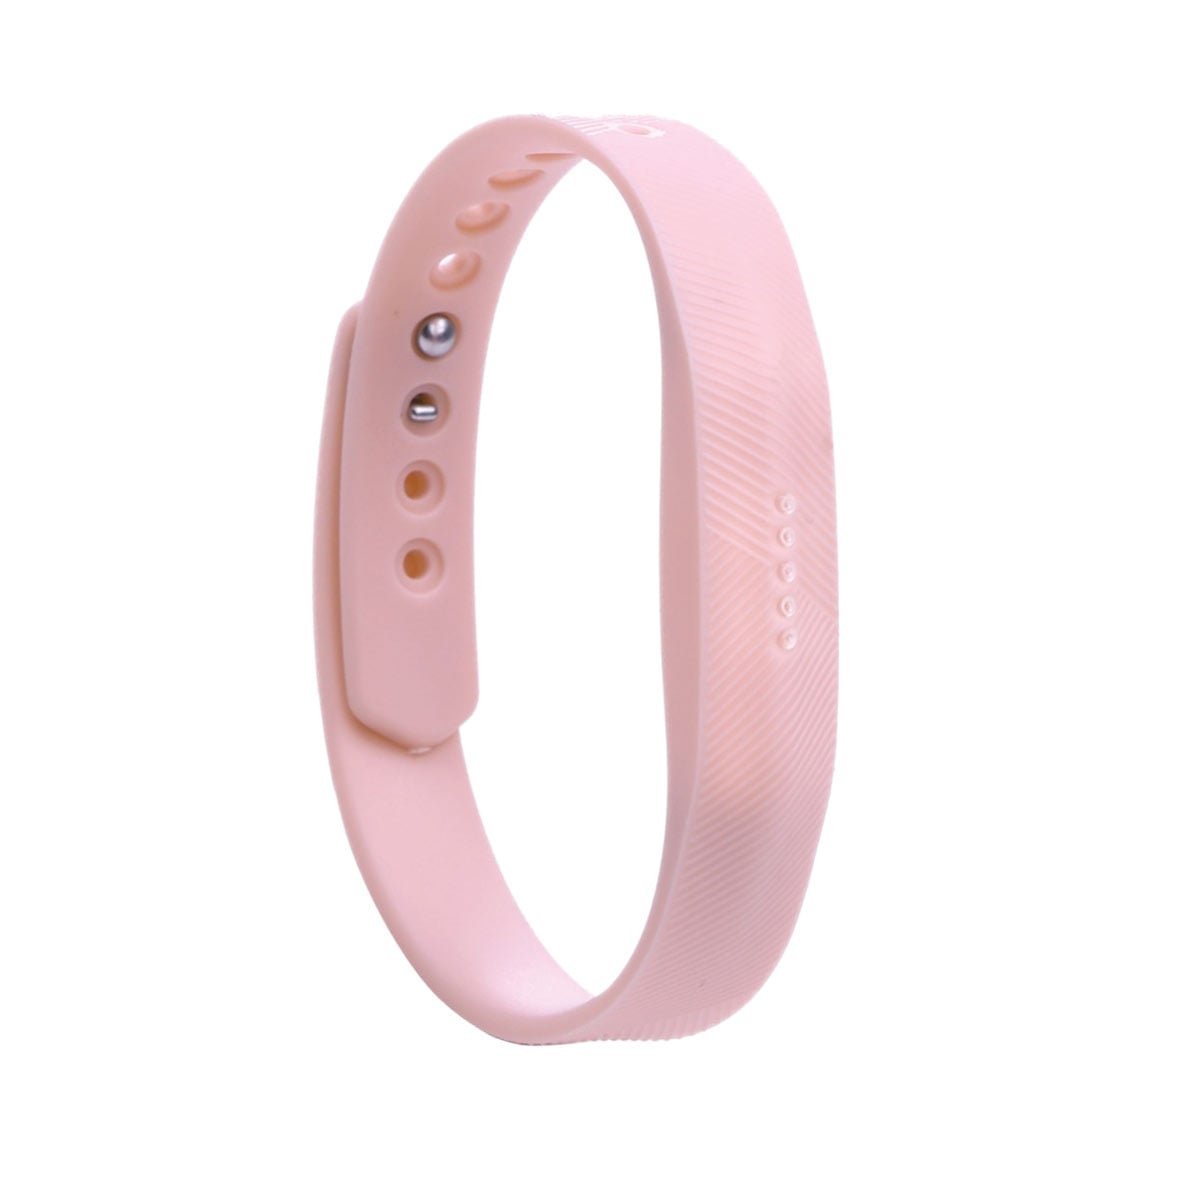 Fitbit Flex 2 Bands Replacement Bracelet Wristband With Clasp Small Light Pink 